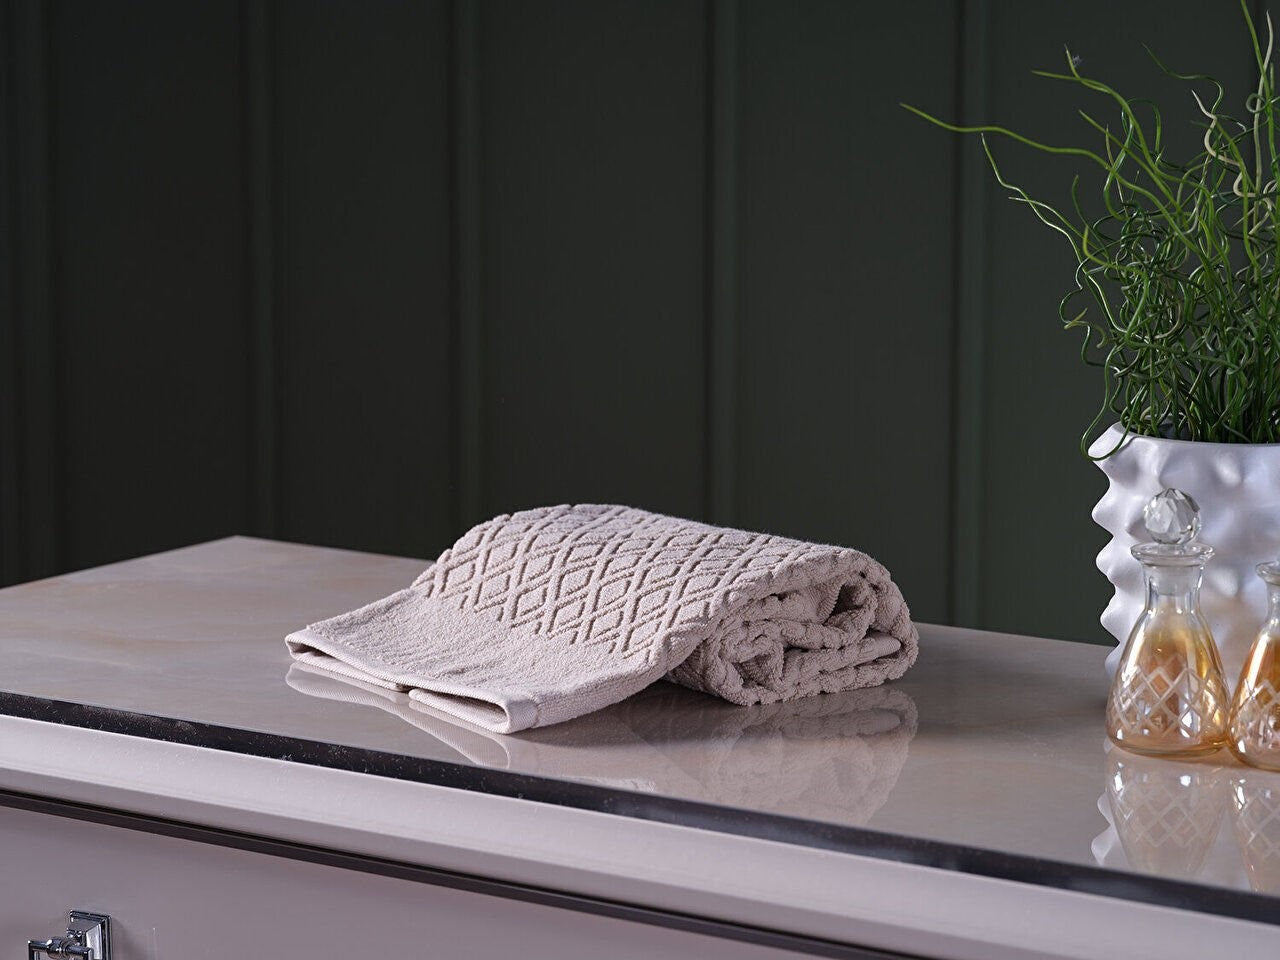 A luxurious washcloth for ultimate comfort and pampering. Treat yourself to the finest quality and indulge in a spa-like experience with our luxury washcloth.